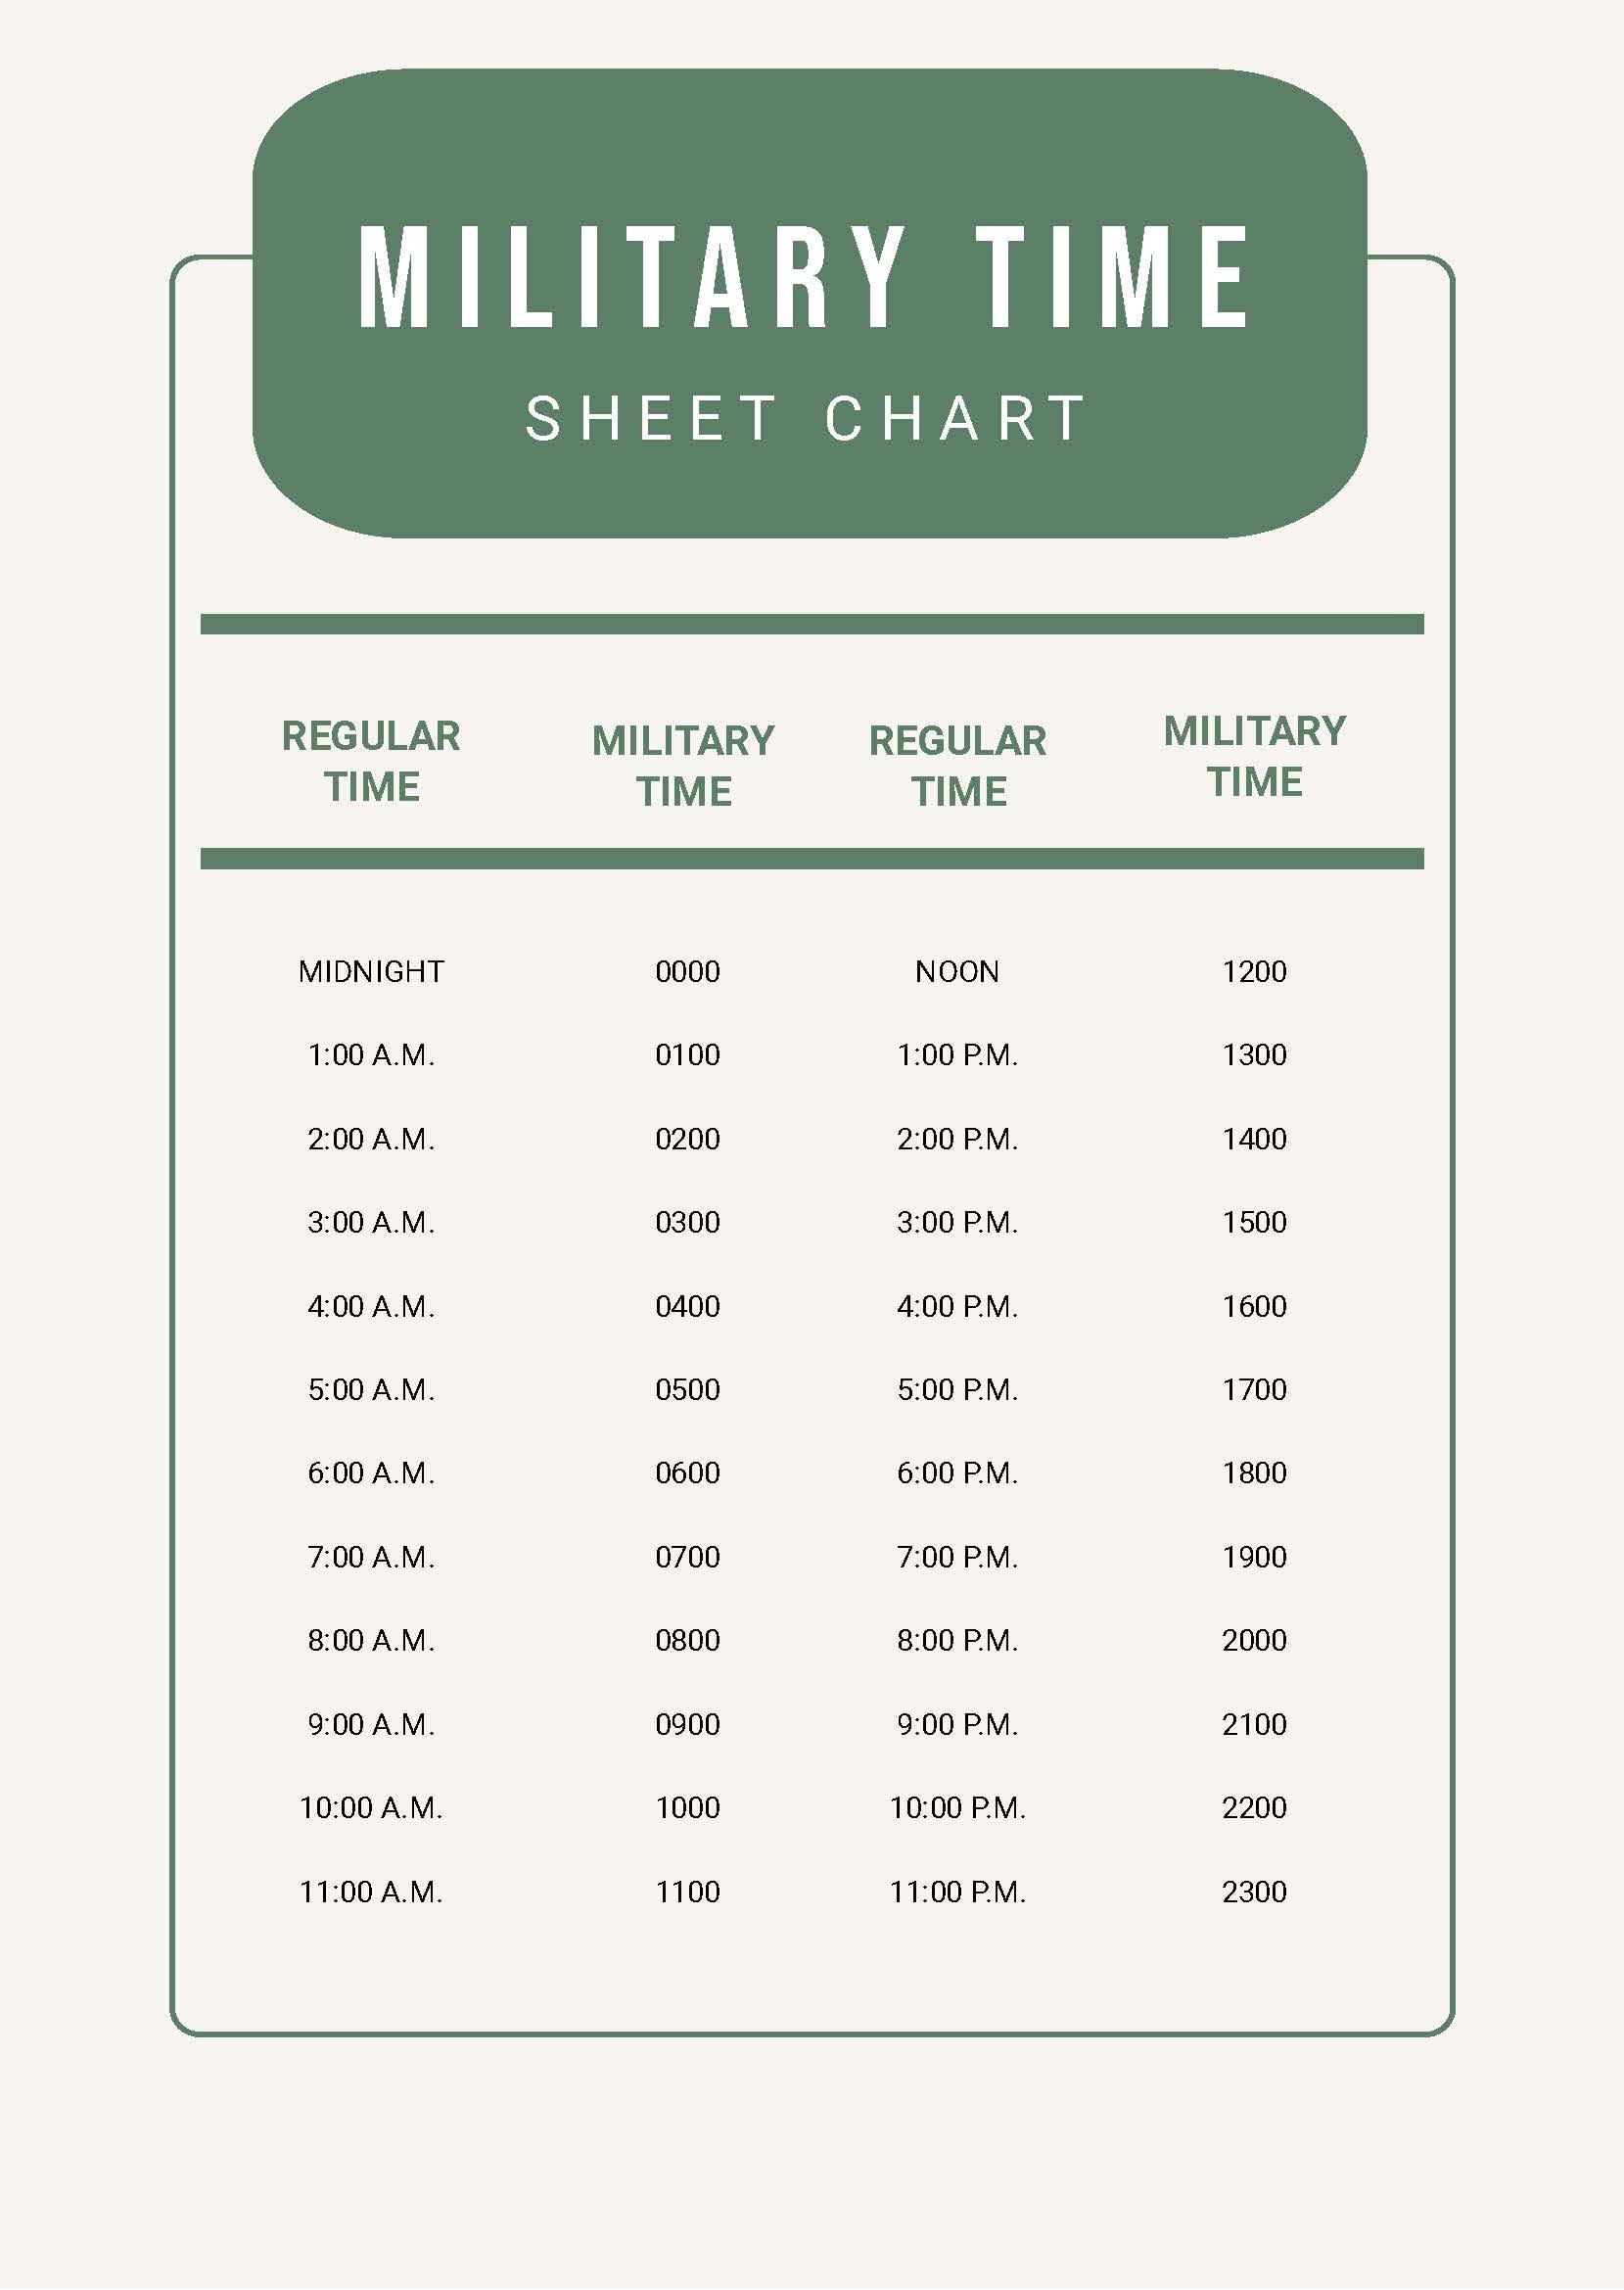 Free Military Time Sheet Chart in PDF